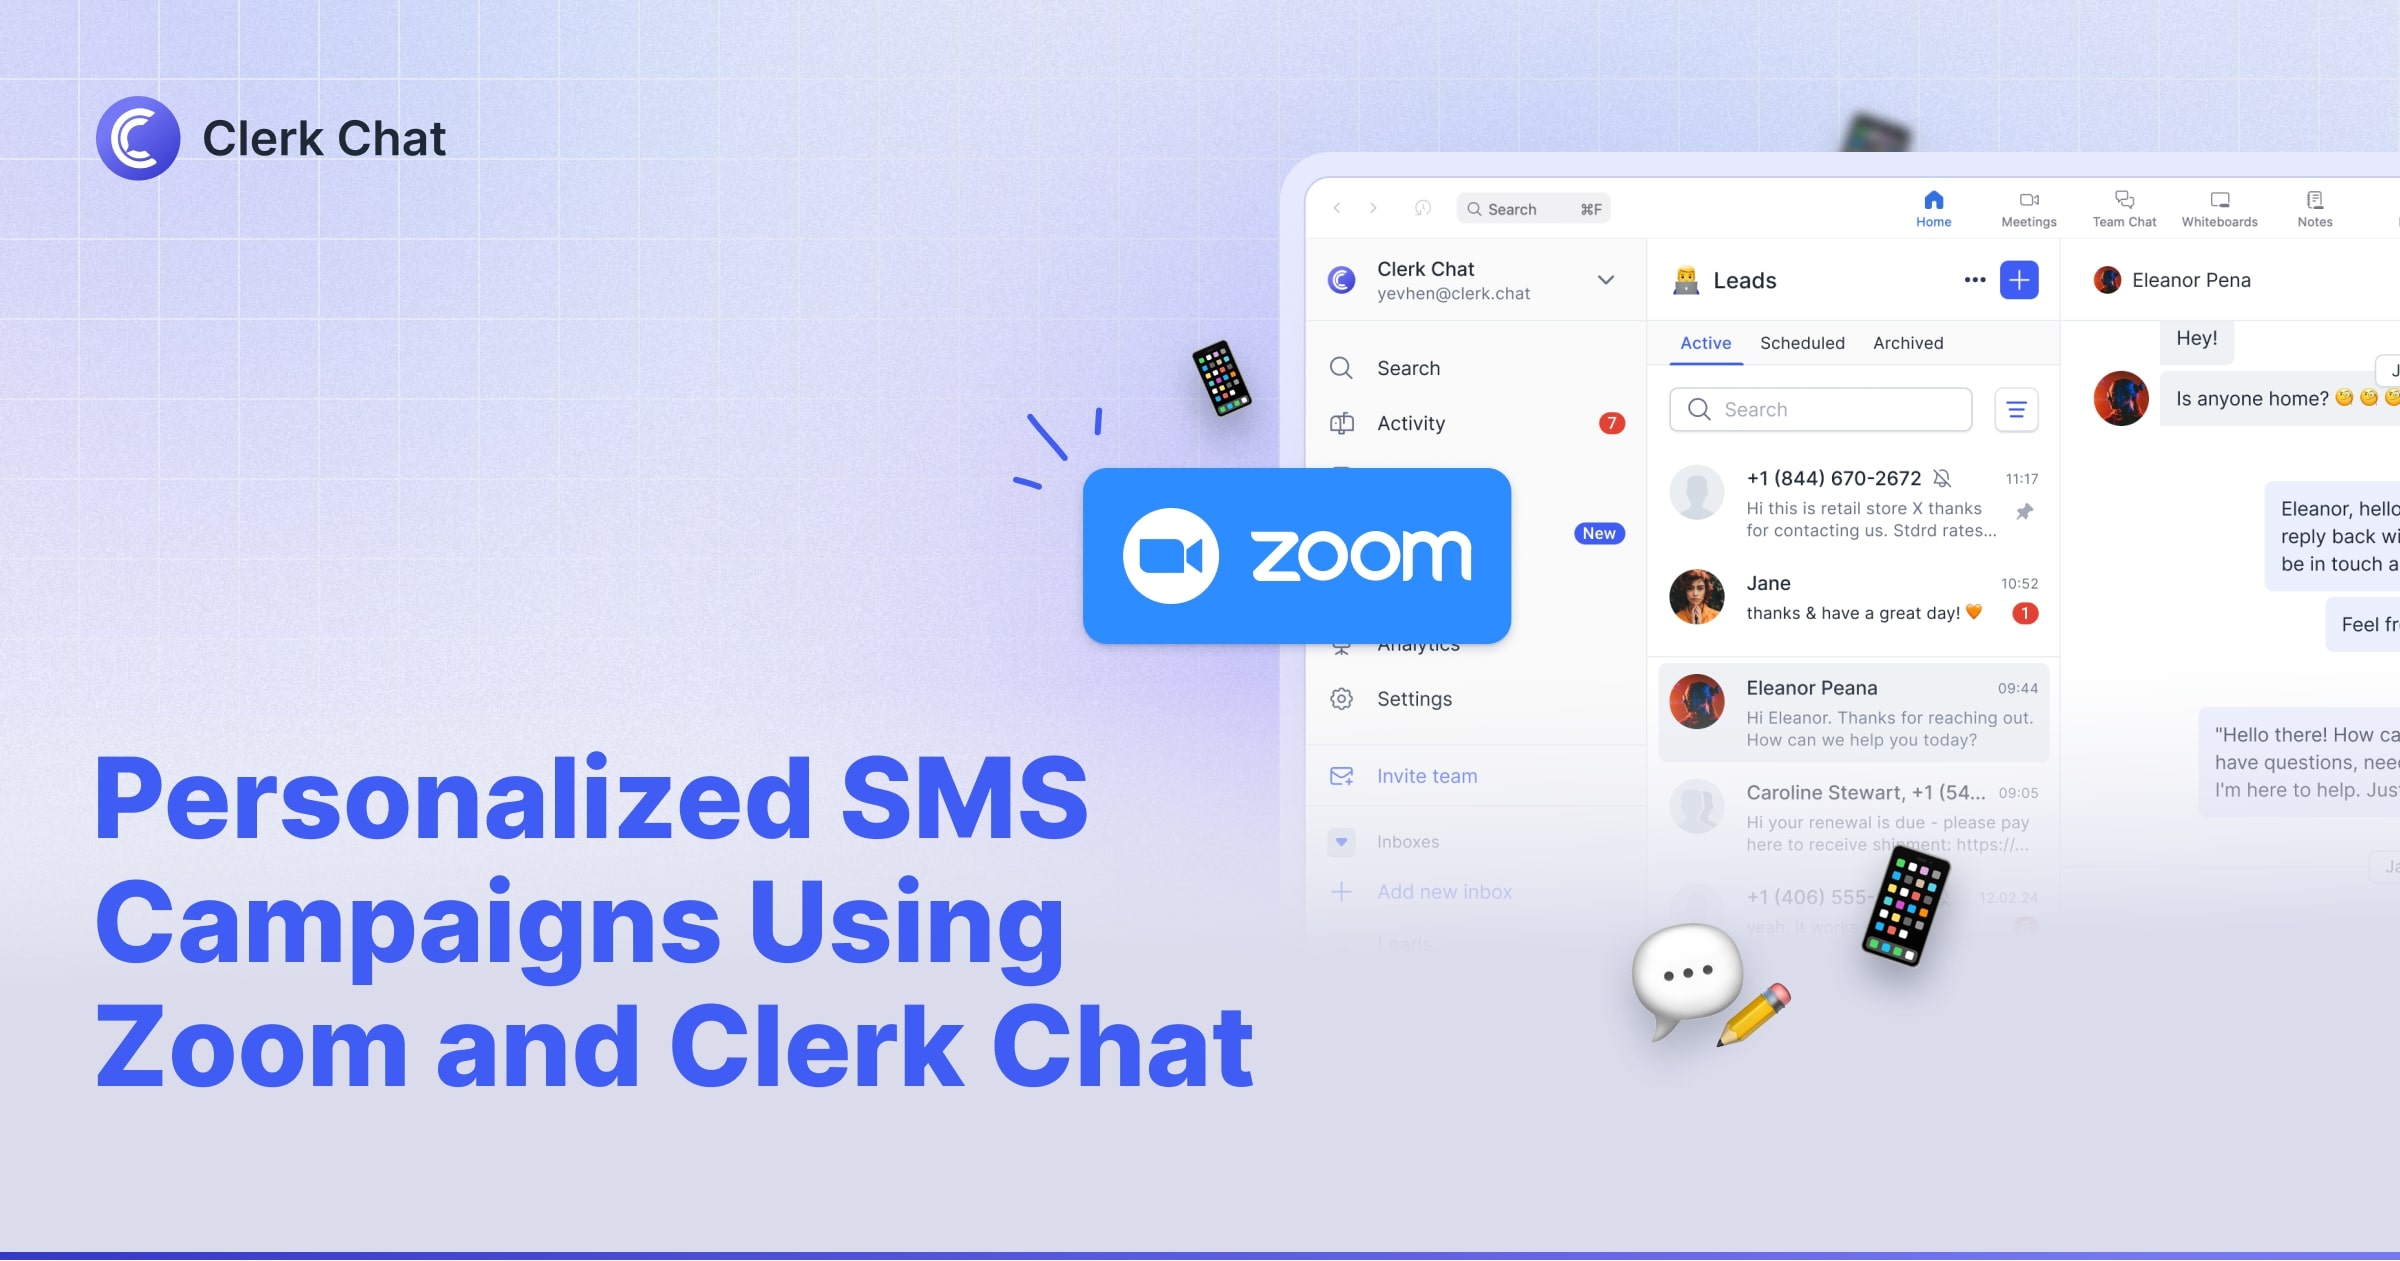 How to Use Zoom 10DLC for SMS Campaigns